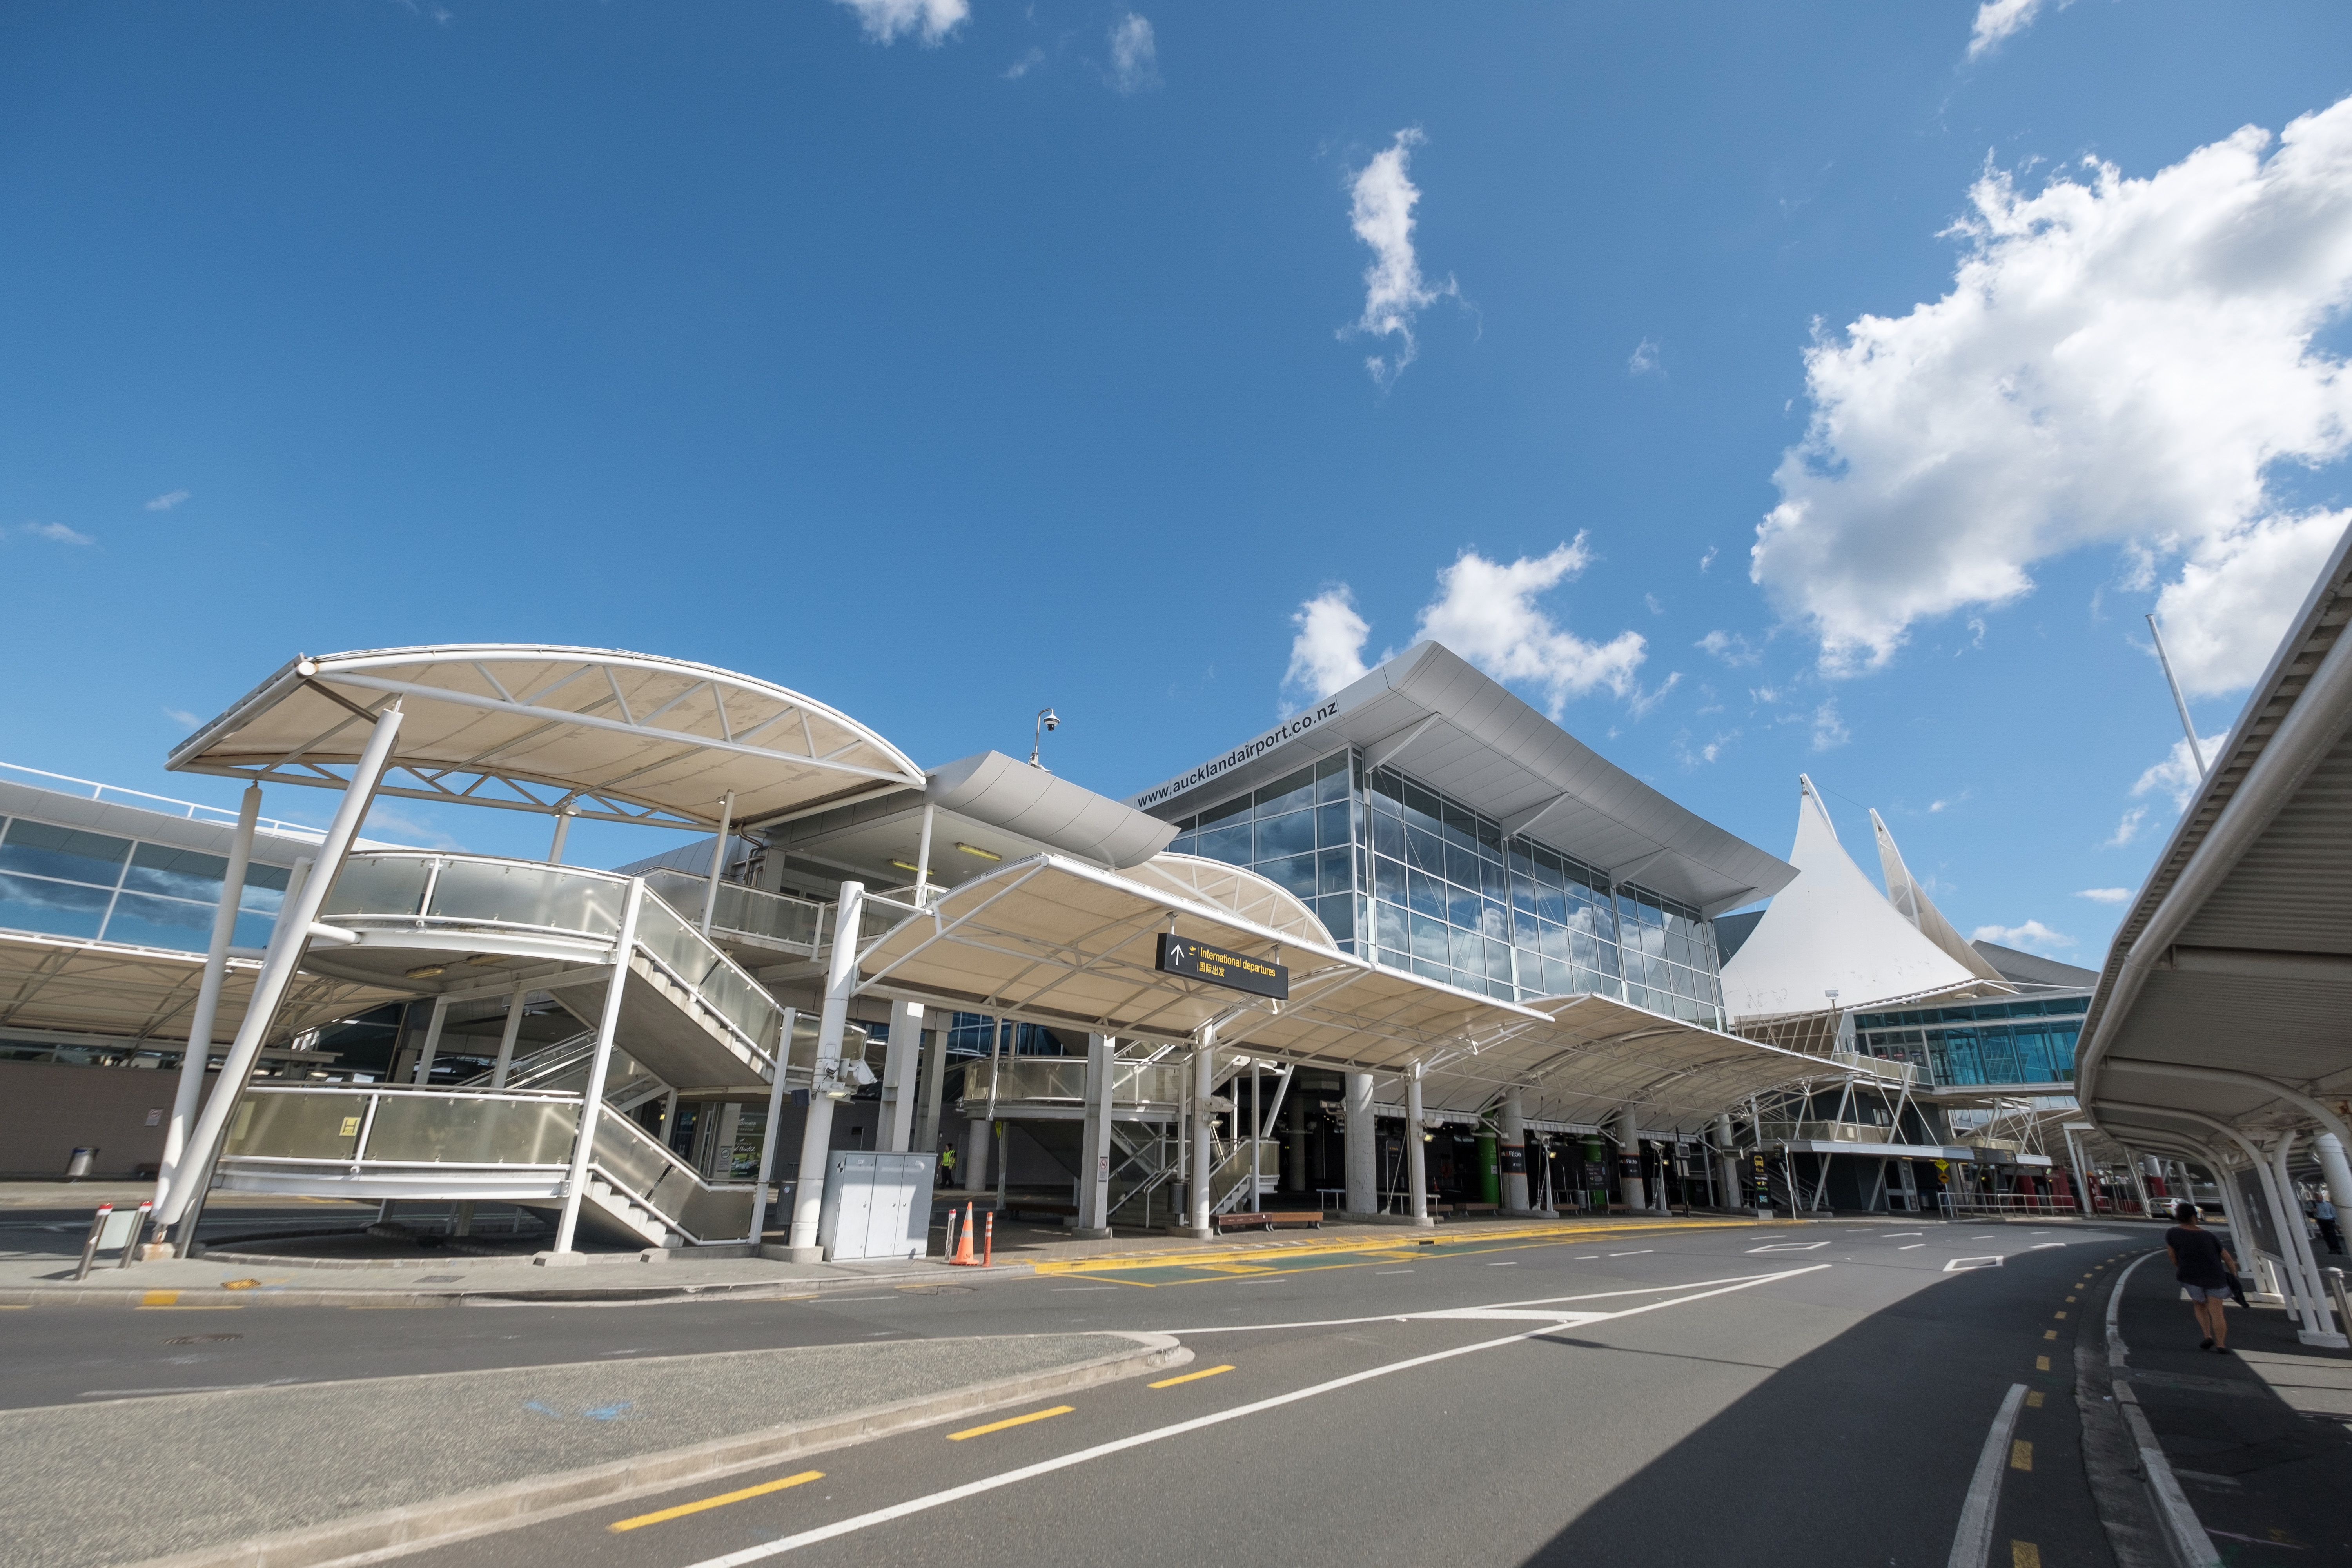 Auckland Airport is the largest airport in the country